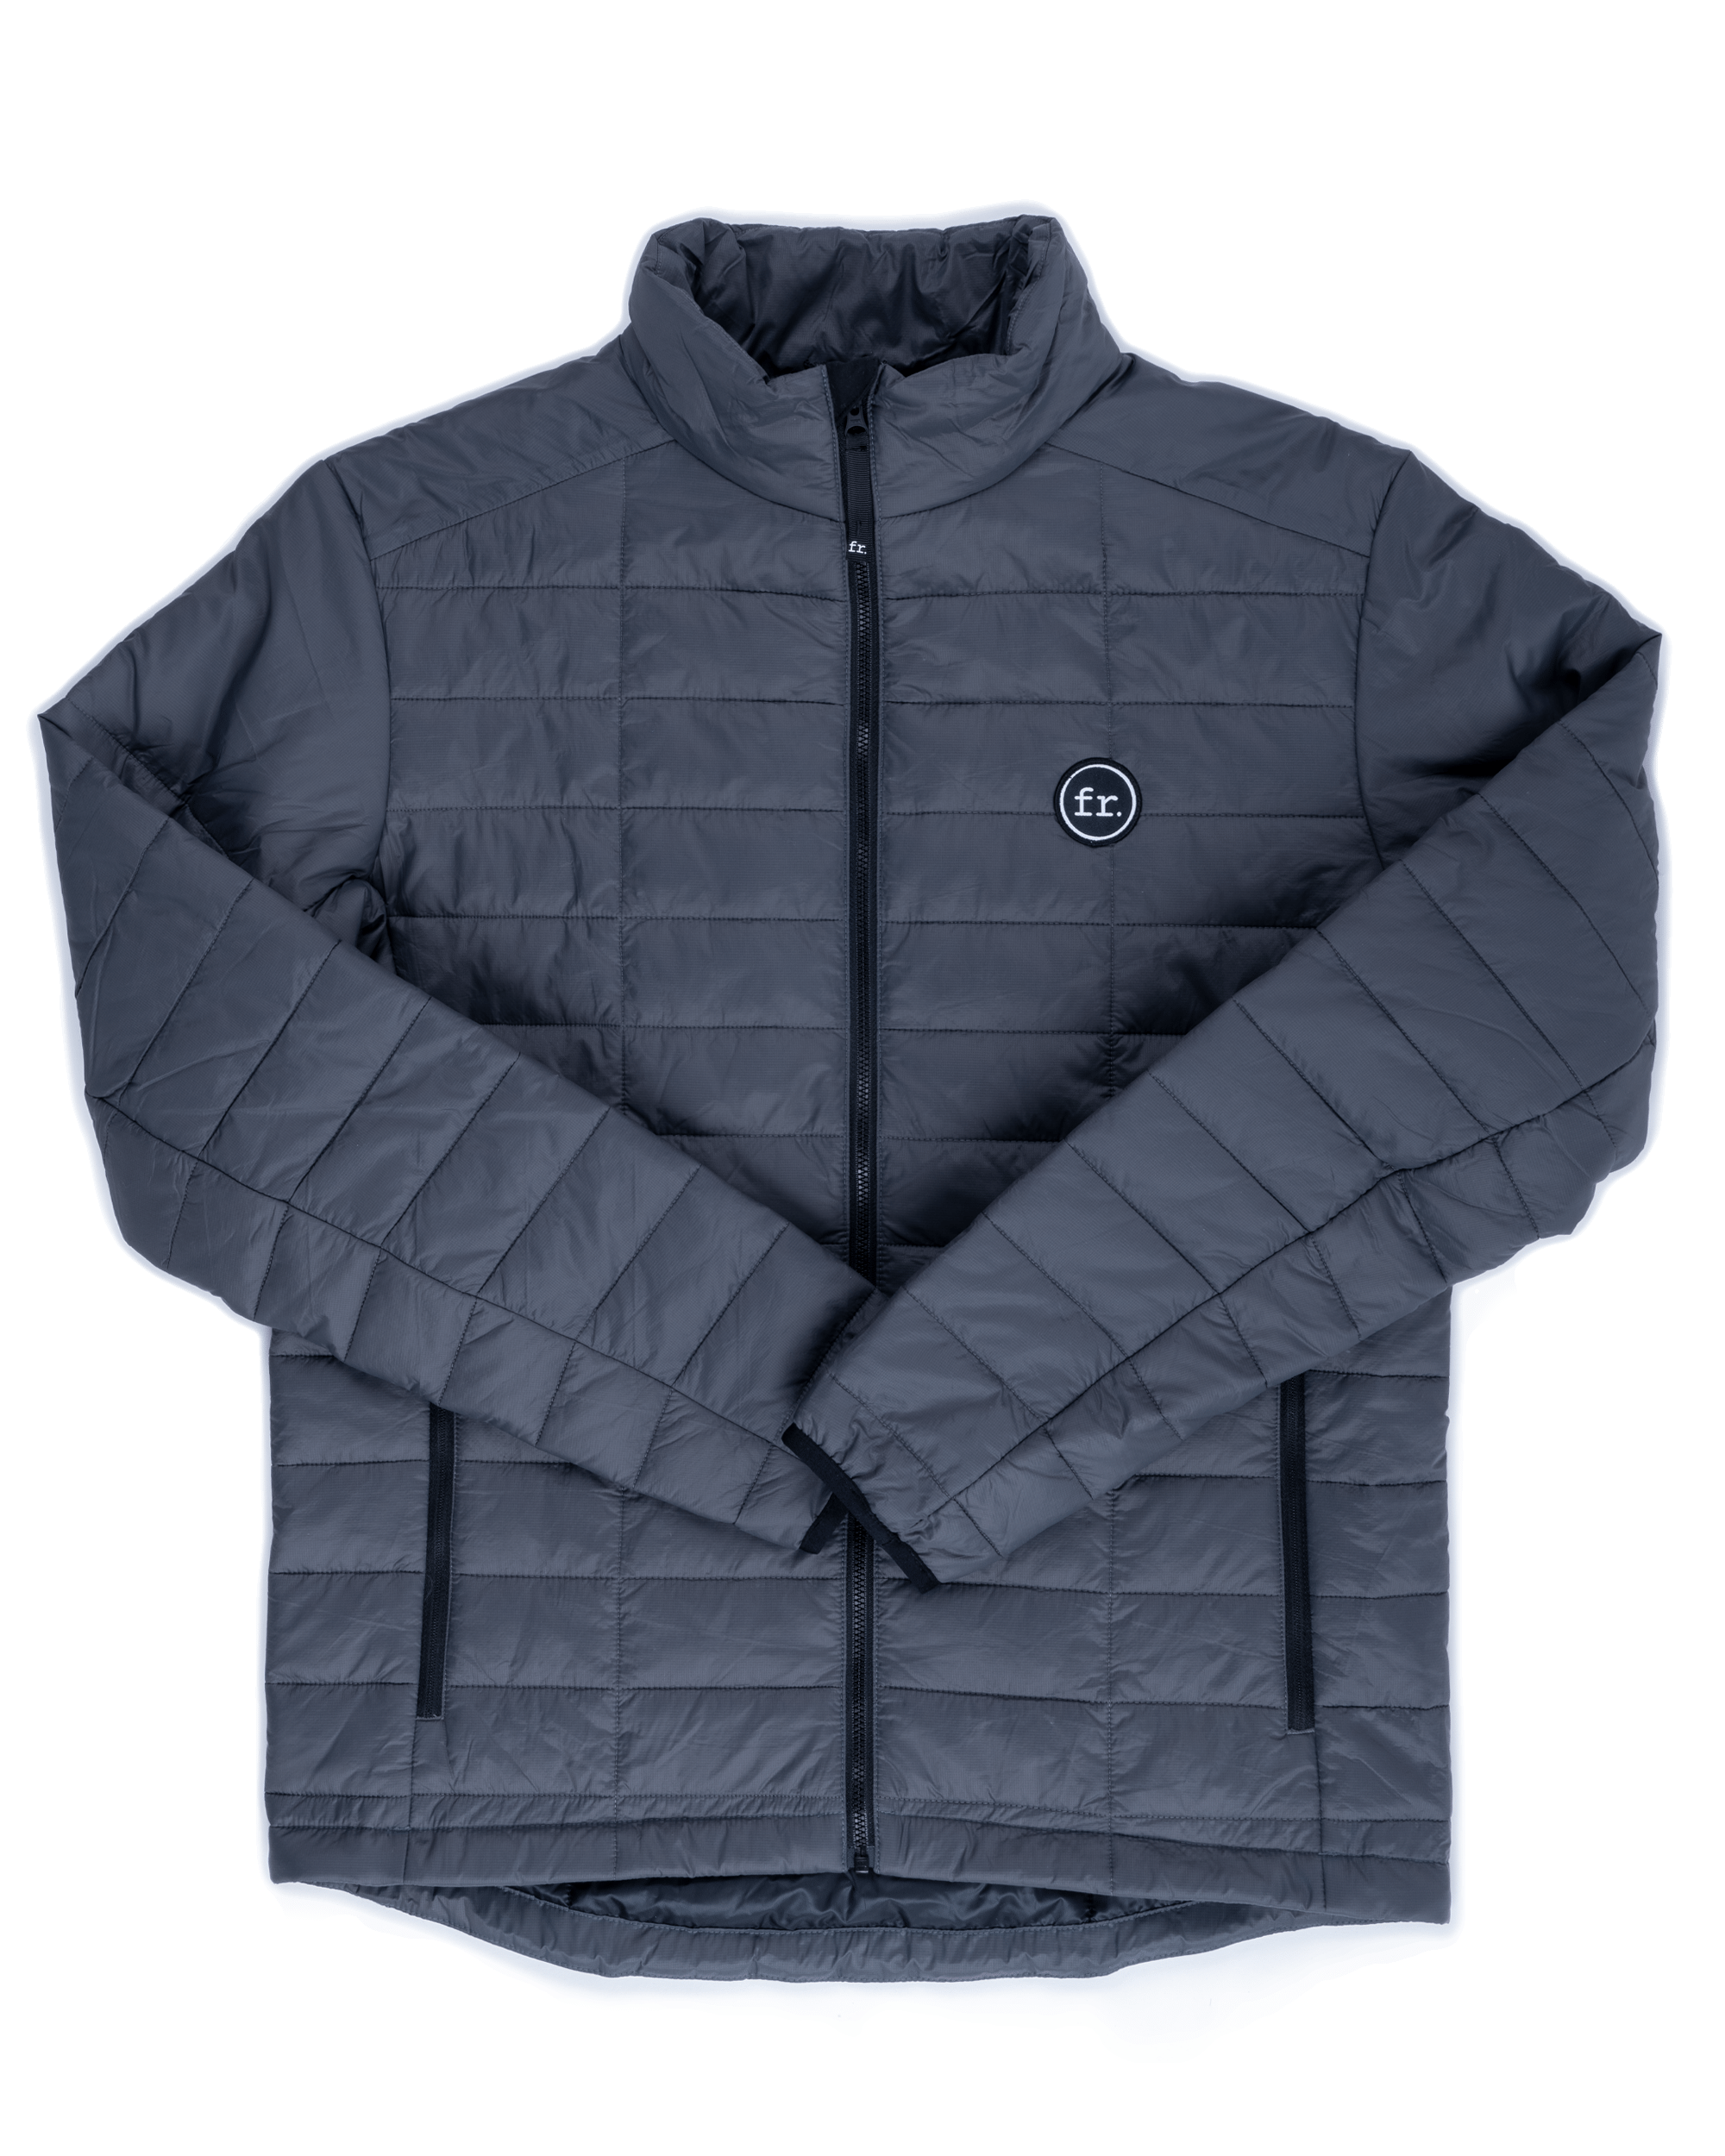 Outerwear | Foreign Rider Co.